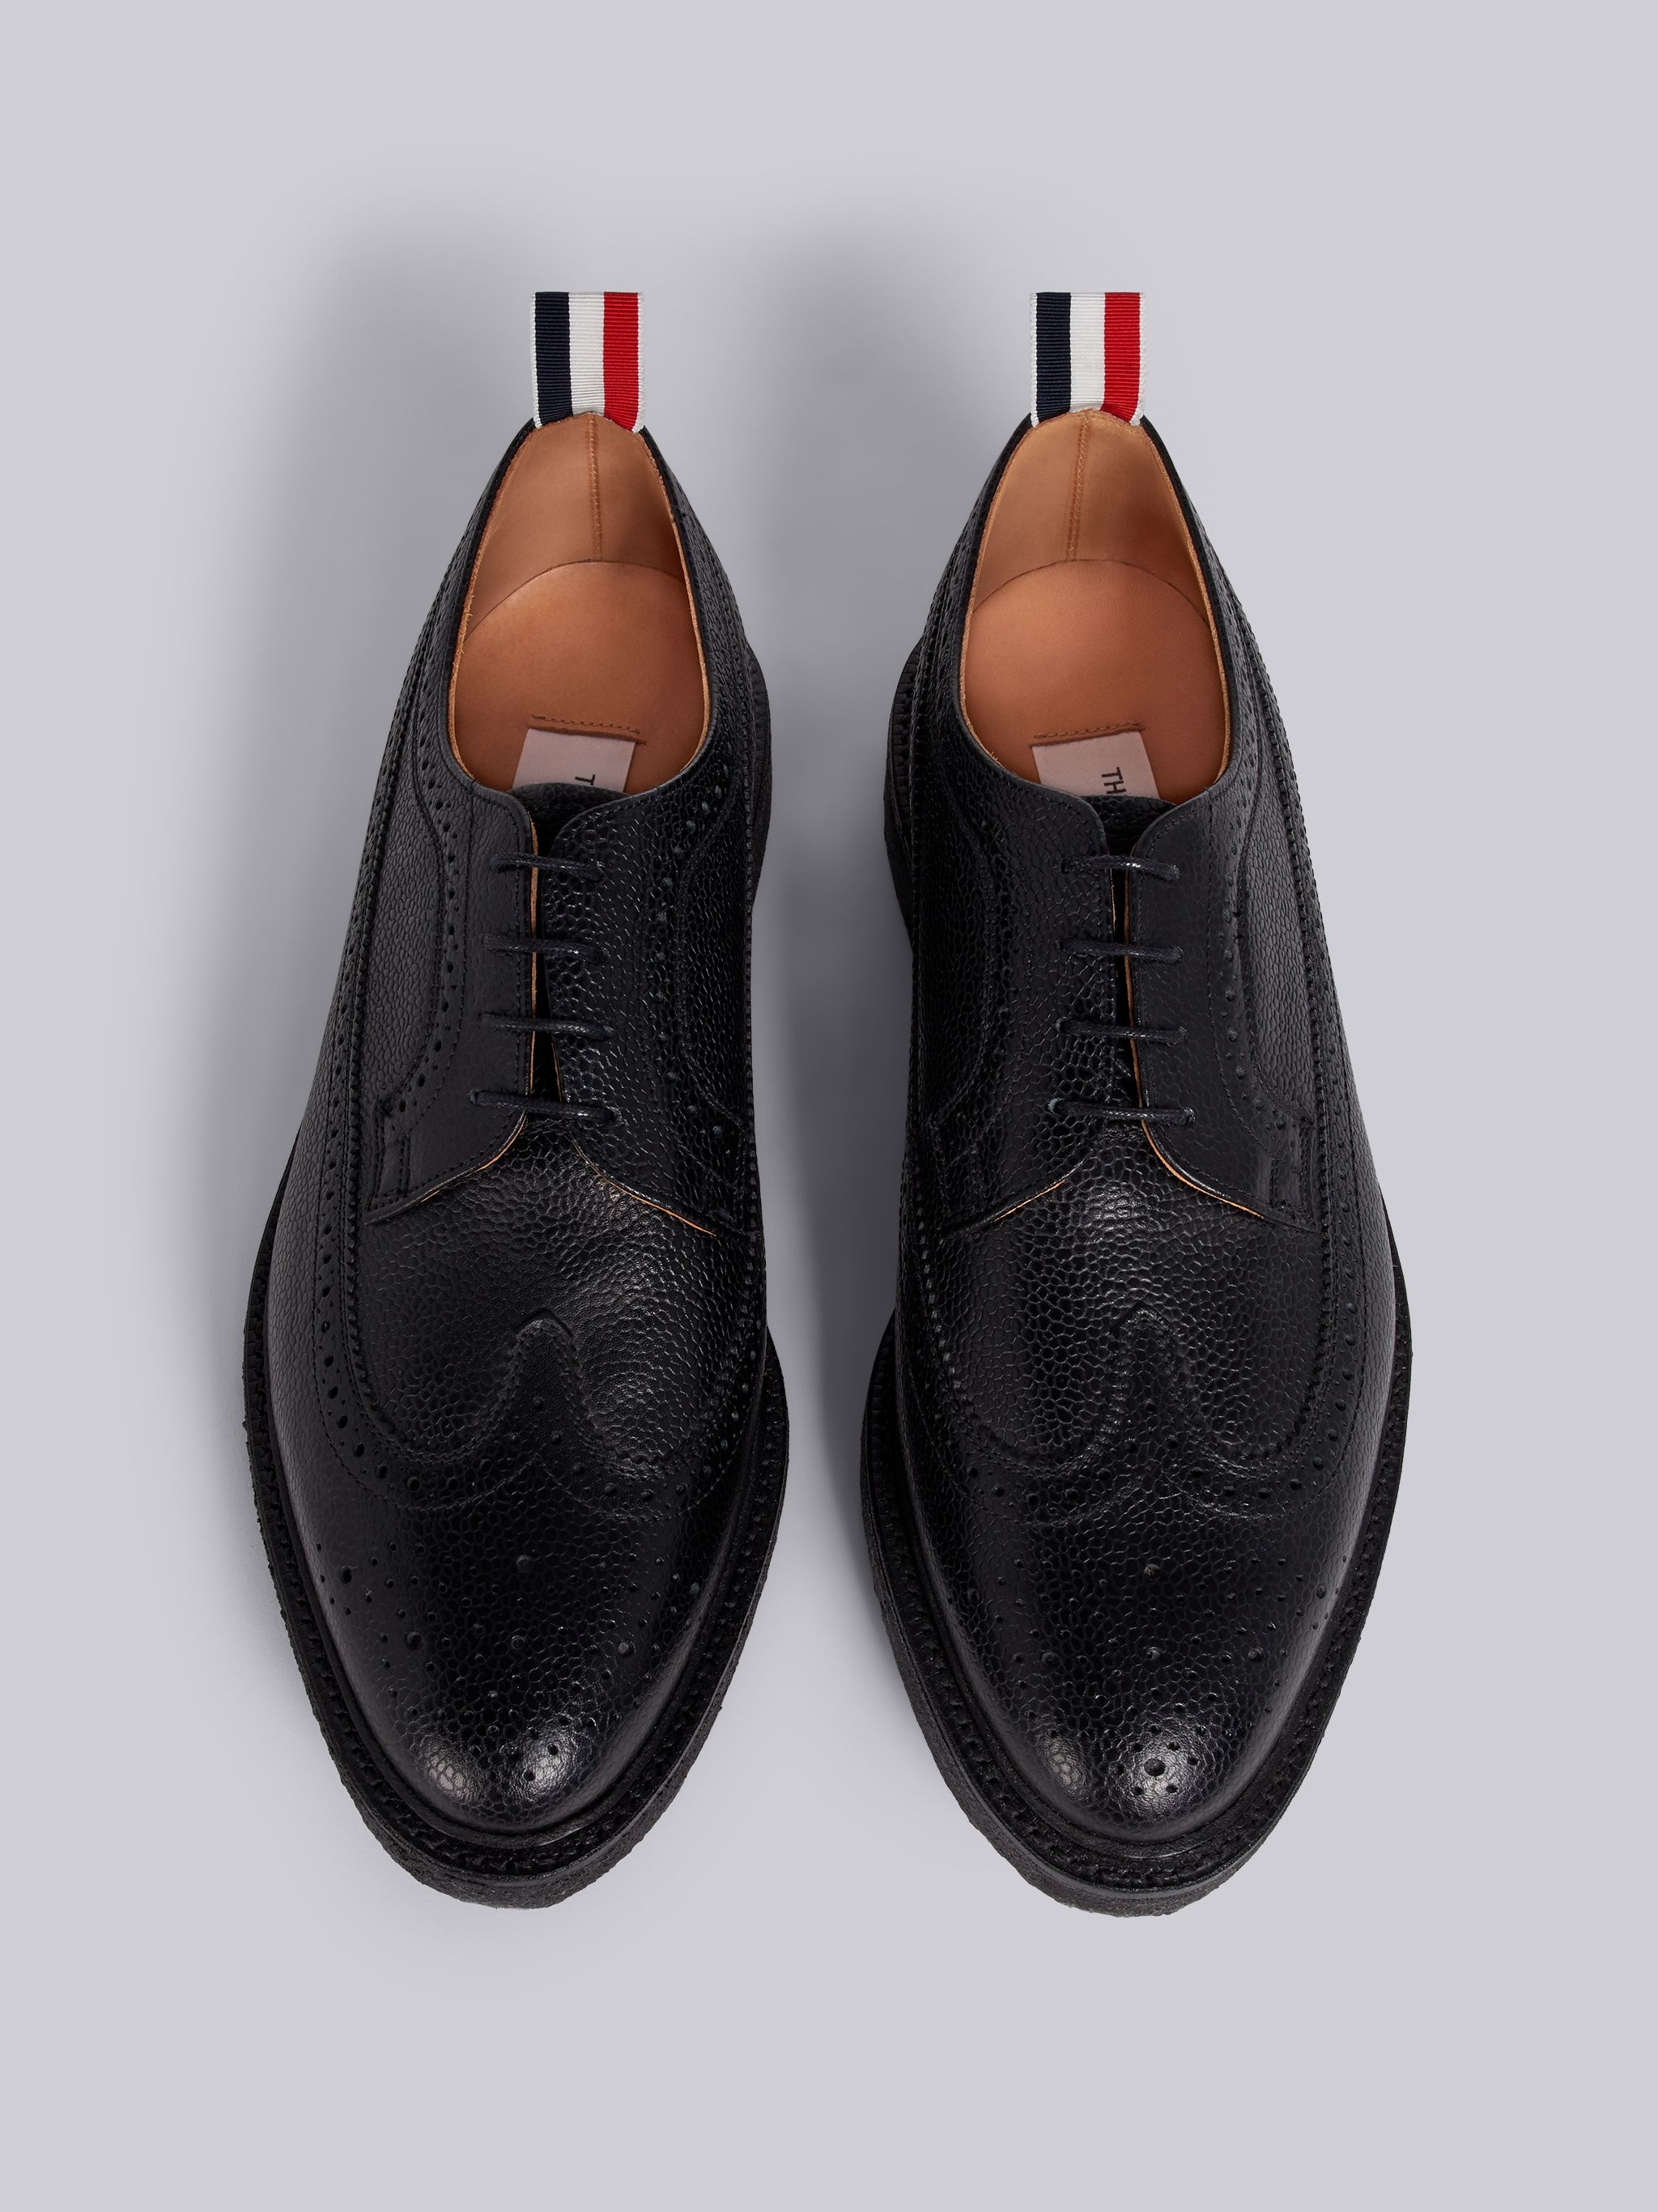 Longwing Brogues Shoes - 4